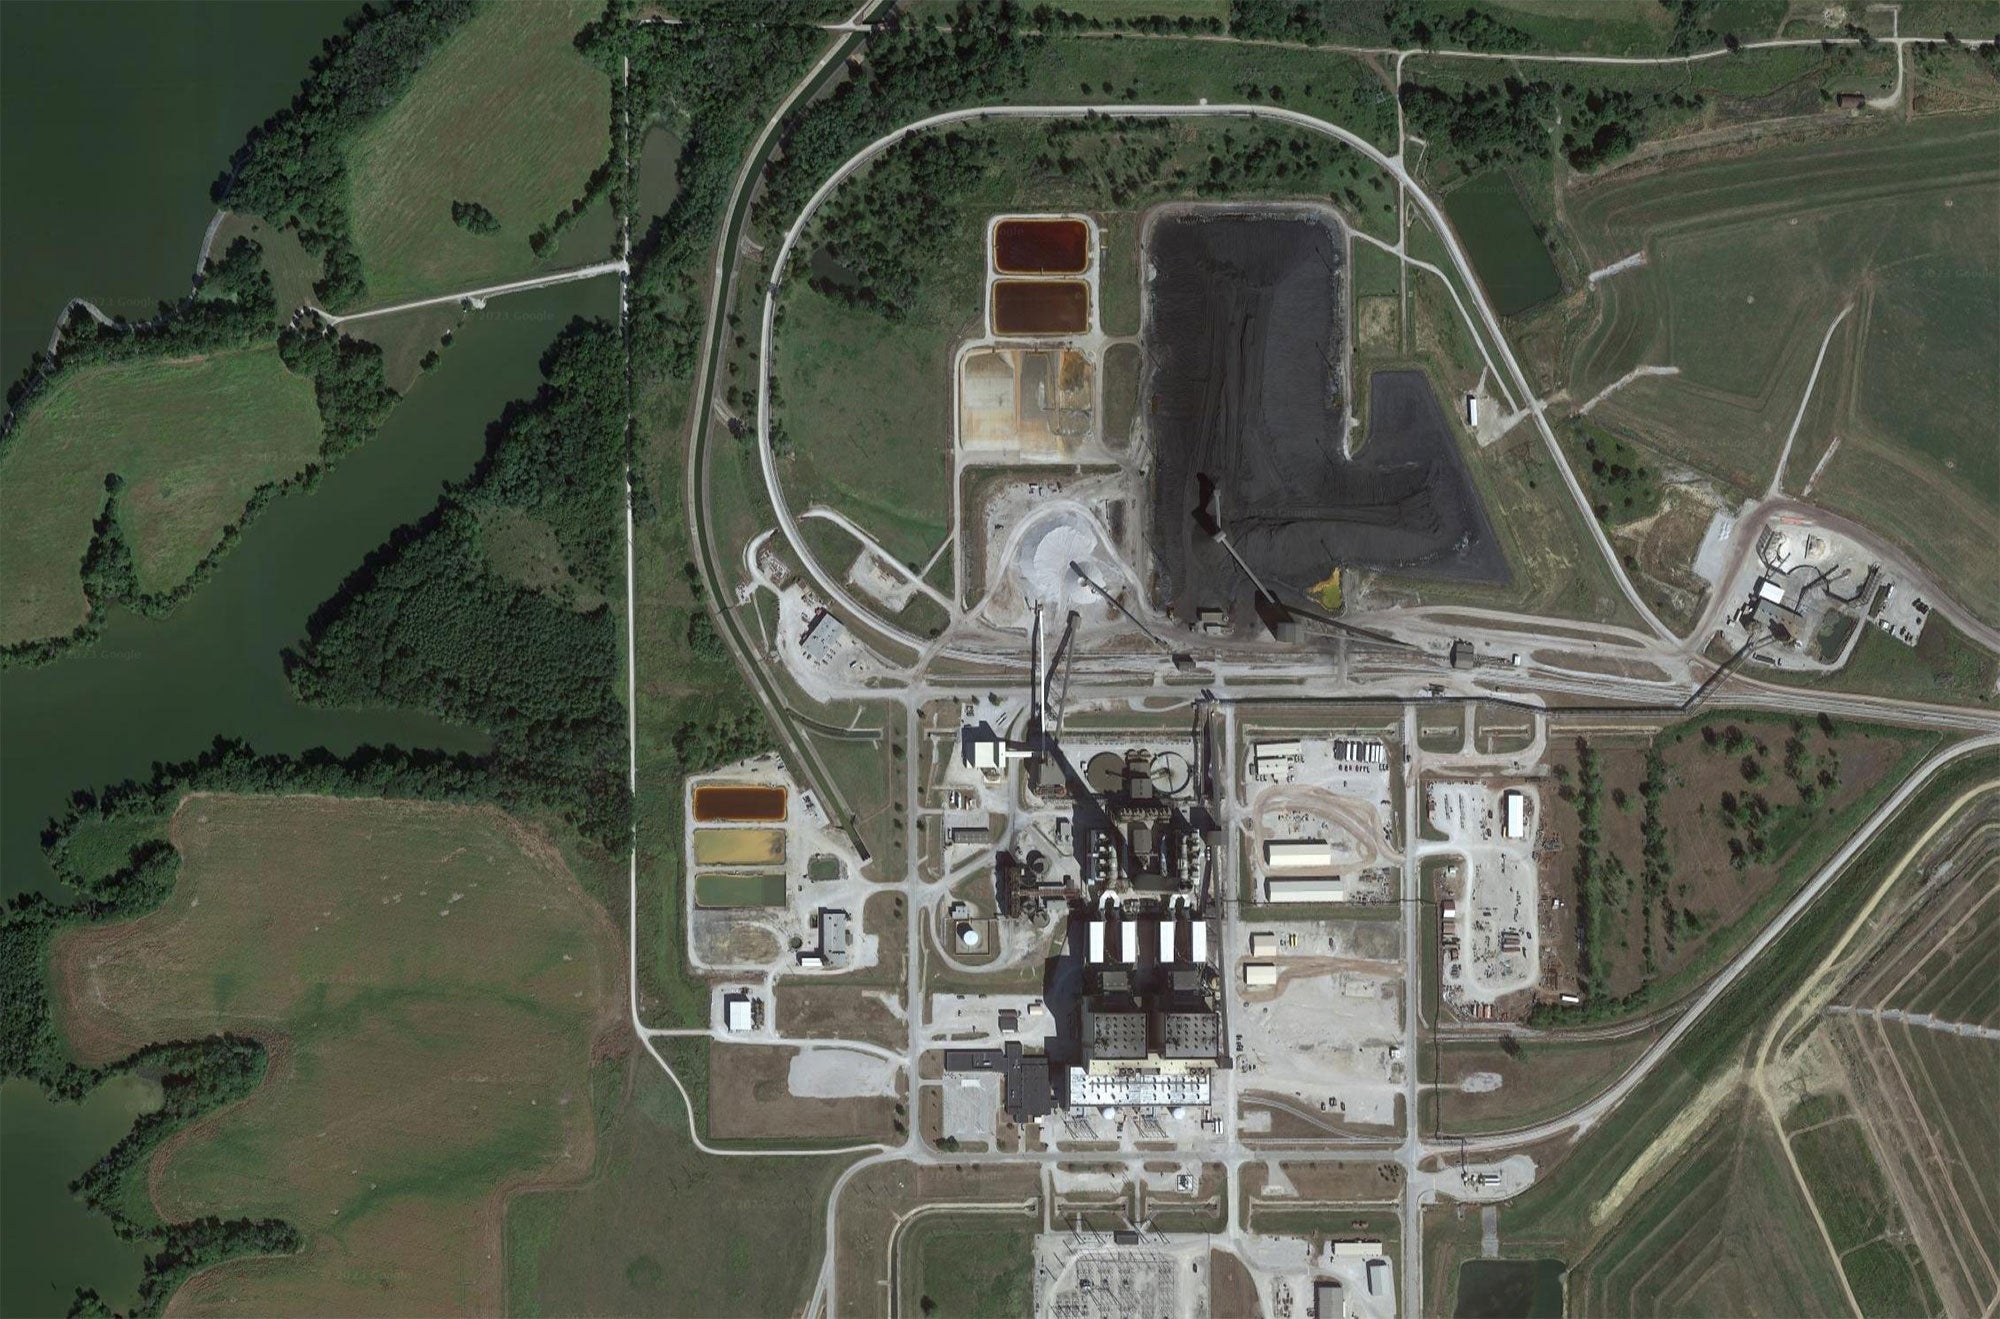 Satellite imagery of the Merom coal-fired power plant in Indiana.